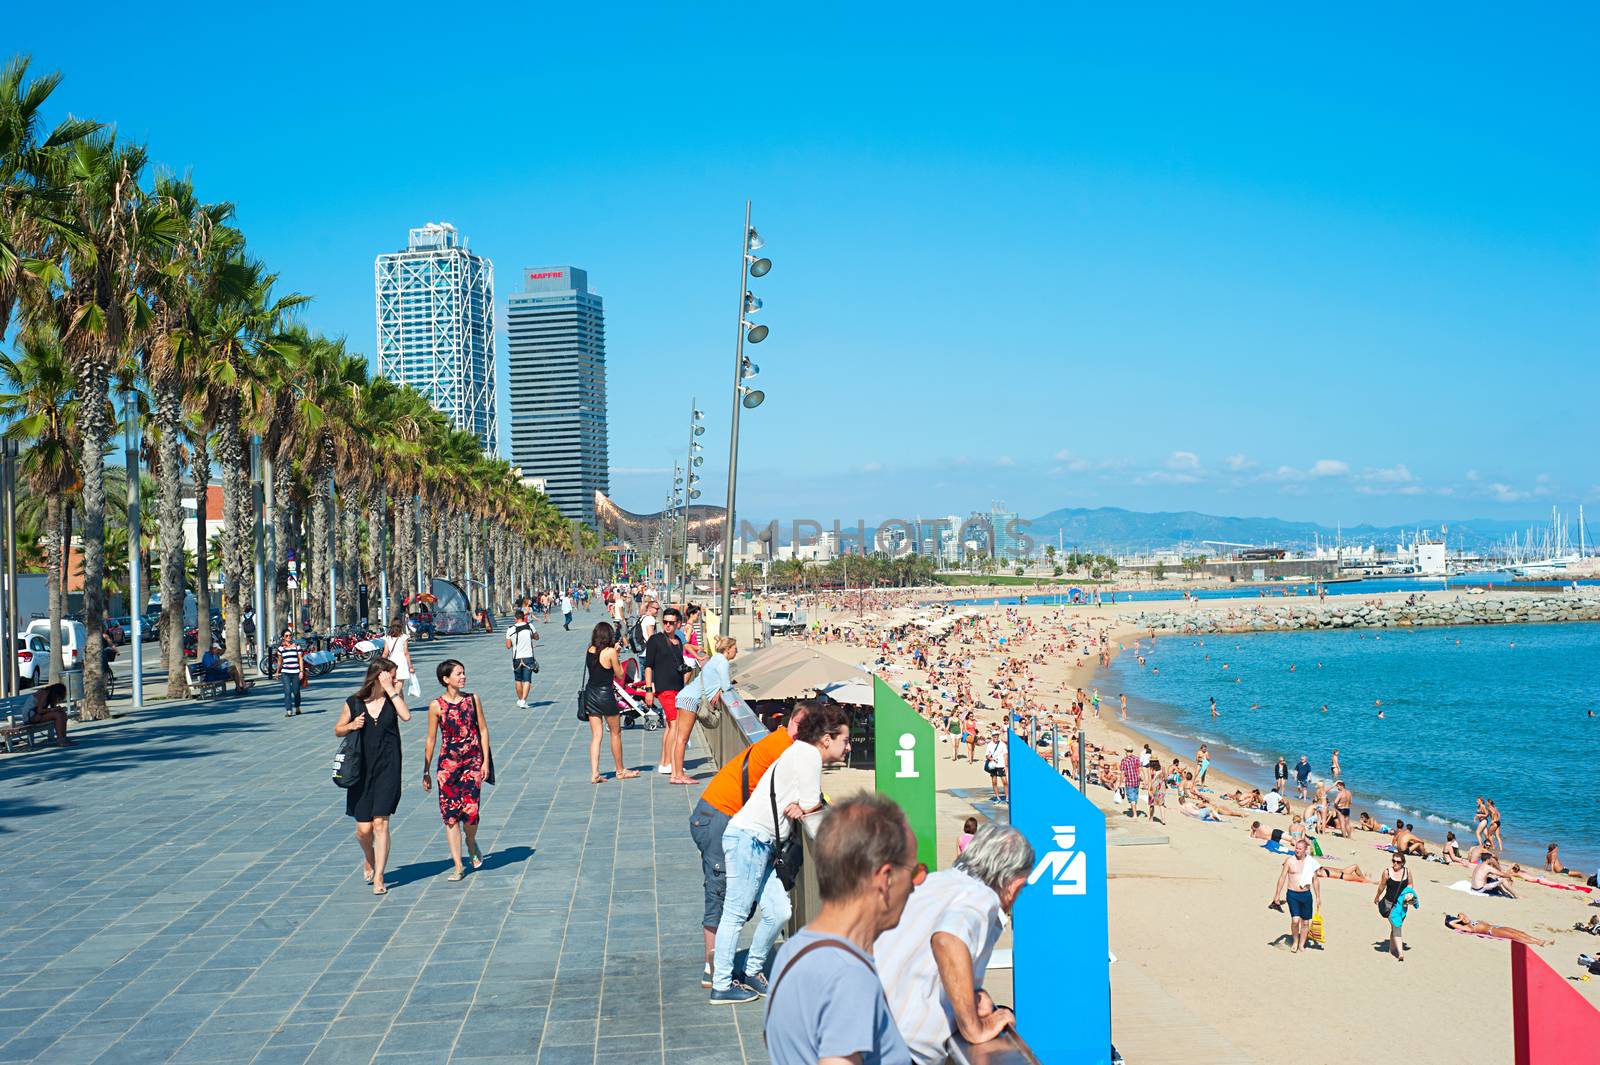 BARCELONA, SPAIN - SEPT 23, 2013: Unidentified people at Barcelona city beach. 400 meters long, it is one of 10 best urban beaches of the world.